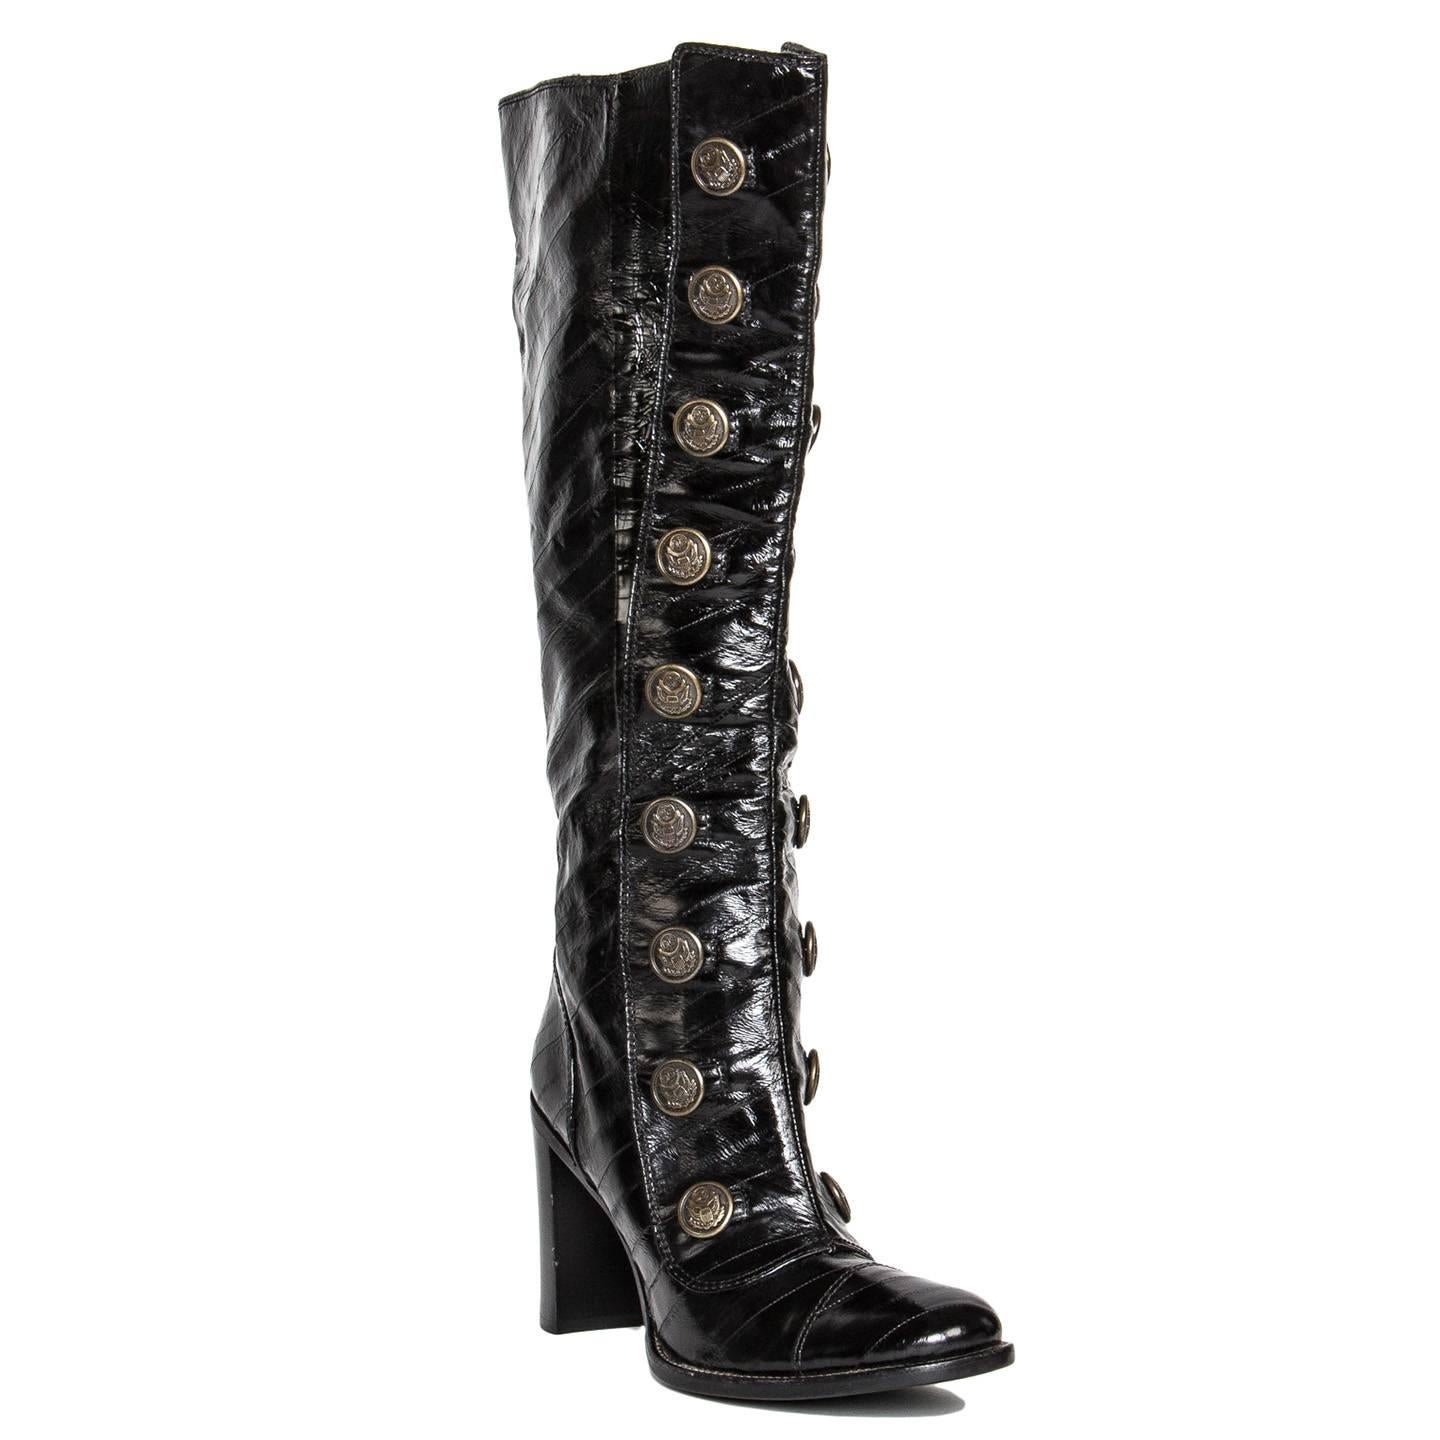 Black eel skin knee high boots with a front patch and two rows of ornate buttons with a vintage military vibe that characterize this style. The eel leather is quite shiny and was applied in stripes, which creates a unique texture, while two patent